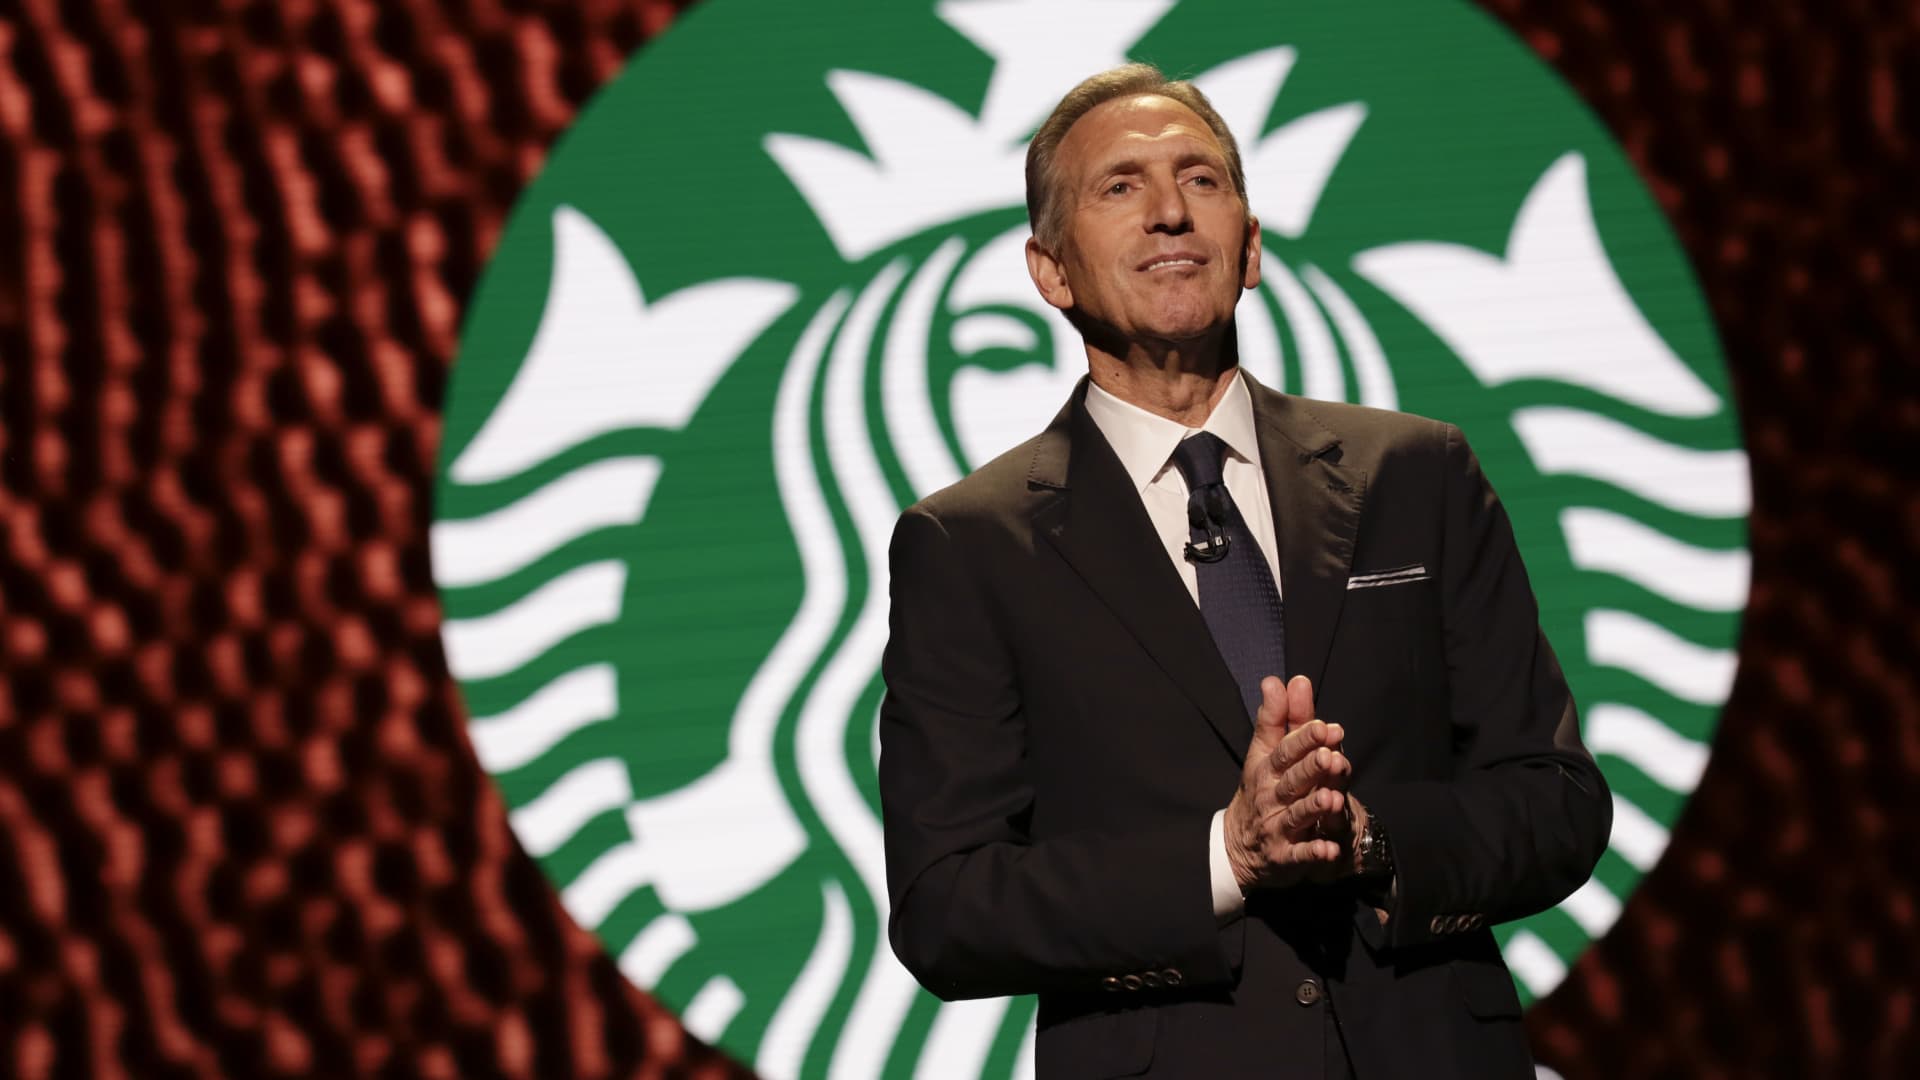 Starbucks projects long-term earnings, revenue growth in double-digits as it implements new strategy